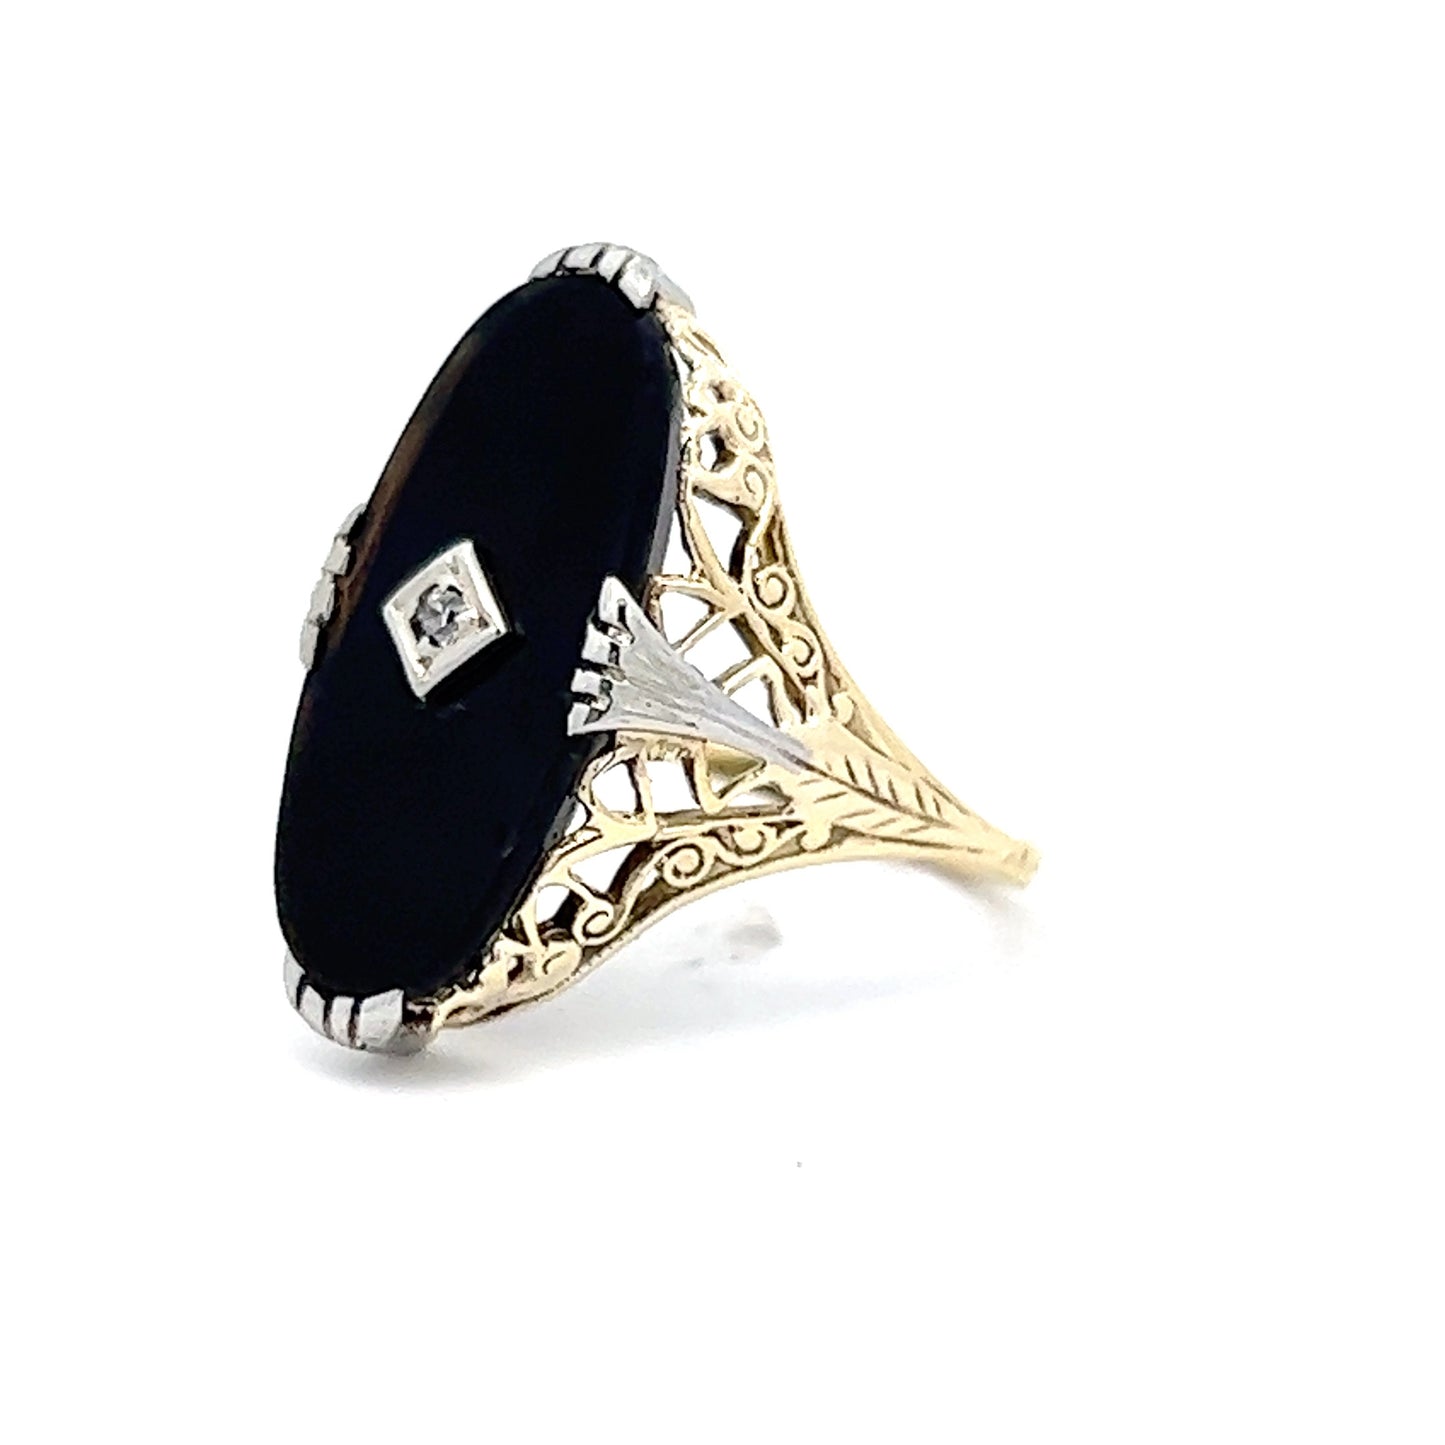 Vintage Deco Diamond Filigree Cocktail Ring in Yellow Gold